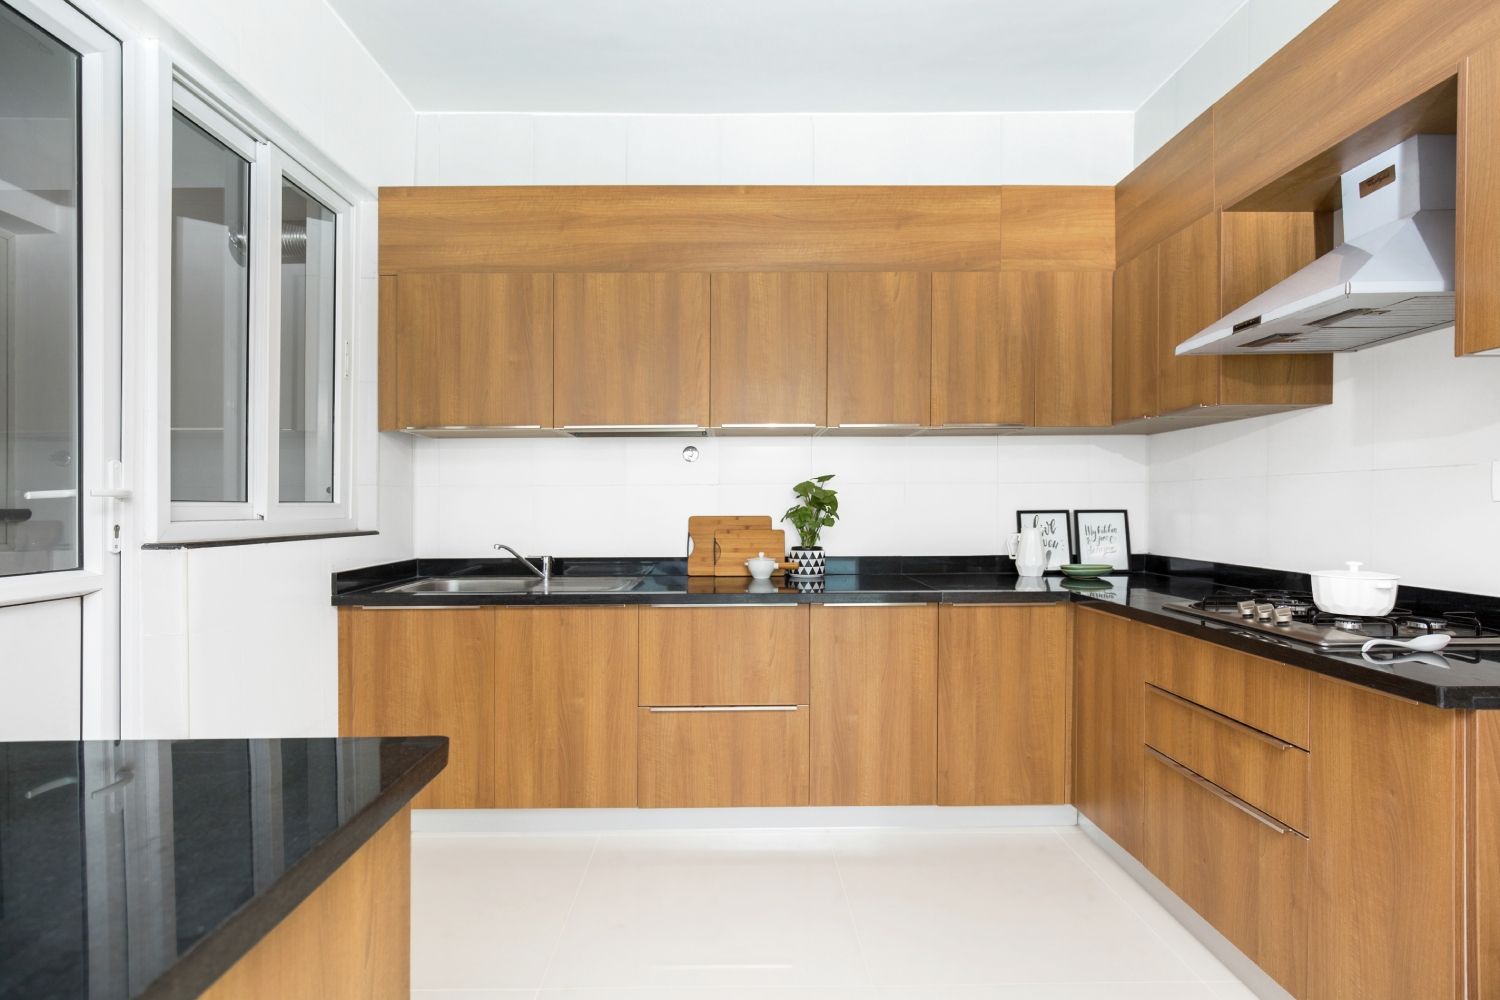 Minimal Open Kitchen Design With Tiepolo Cabinets